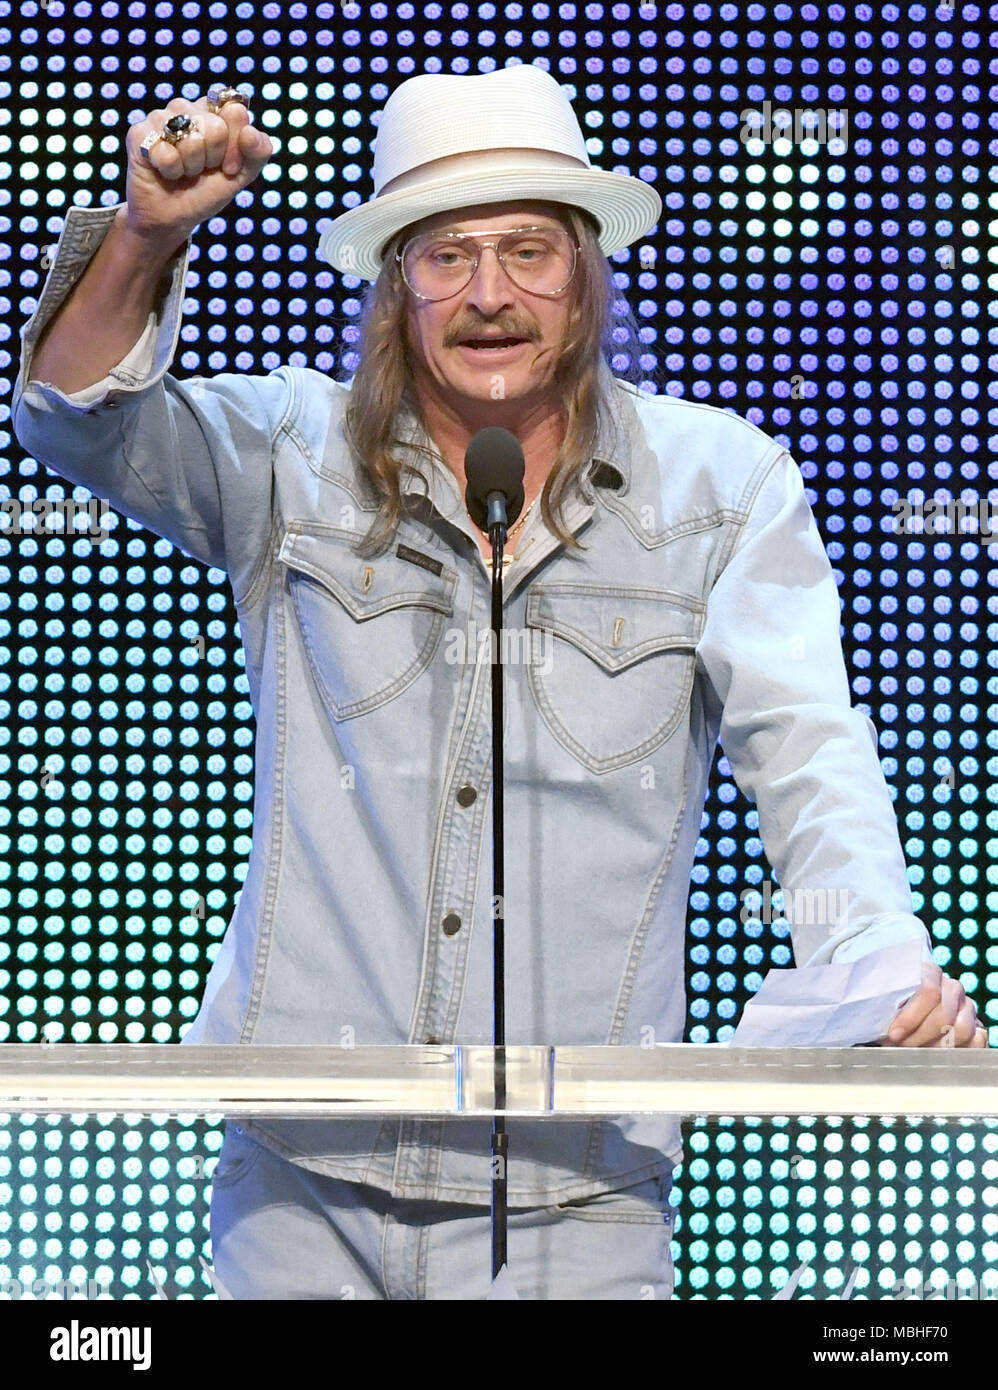 New Orleans, LA, USA. 6th Apr, 2018. Kid Rock at WWE's 2018 Hall Of Fame Induction Ceremony at the Smoothie King Center in New Orleans, Louisiana on April 6, 2018. Credit: George Napolitano/Media Punch/Alamy Live News Stock Photo